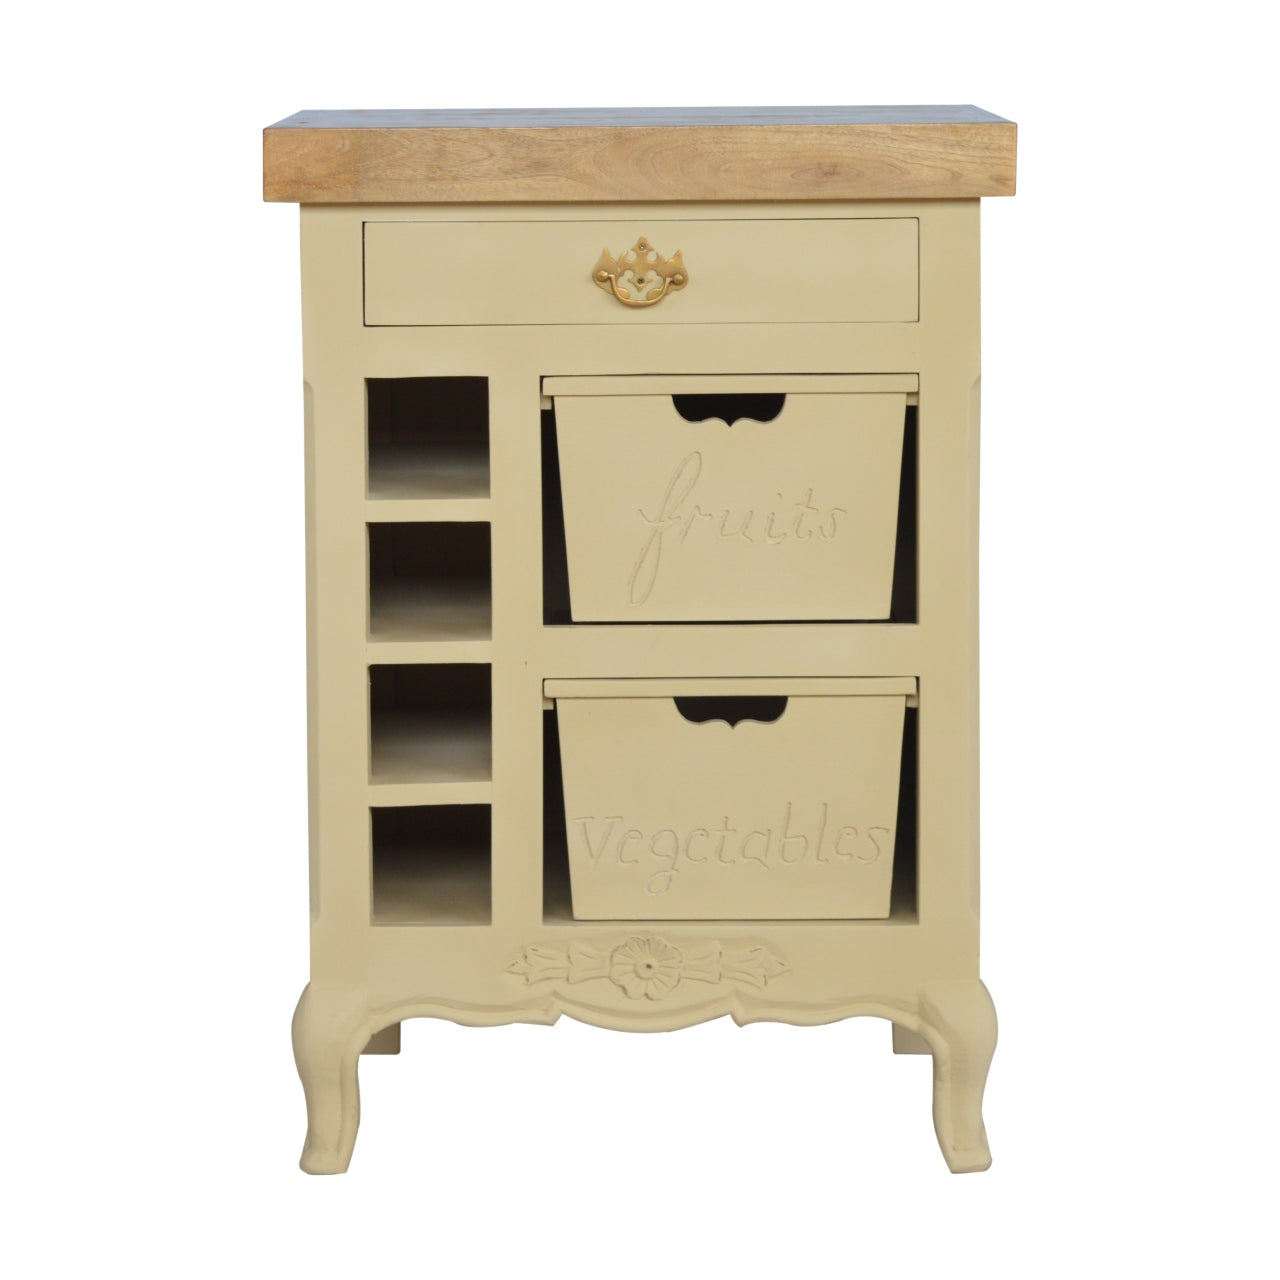 View French Style Cream Cabinet information